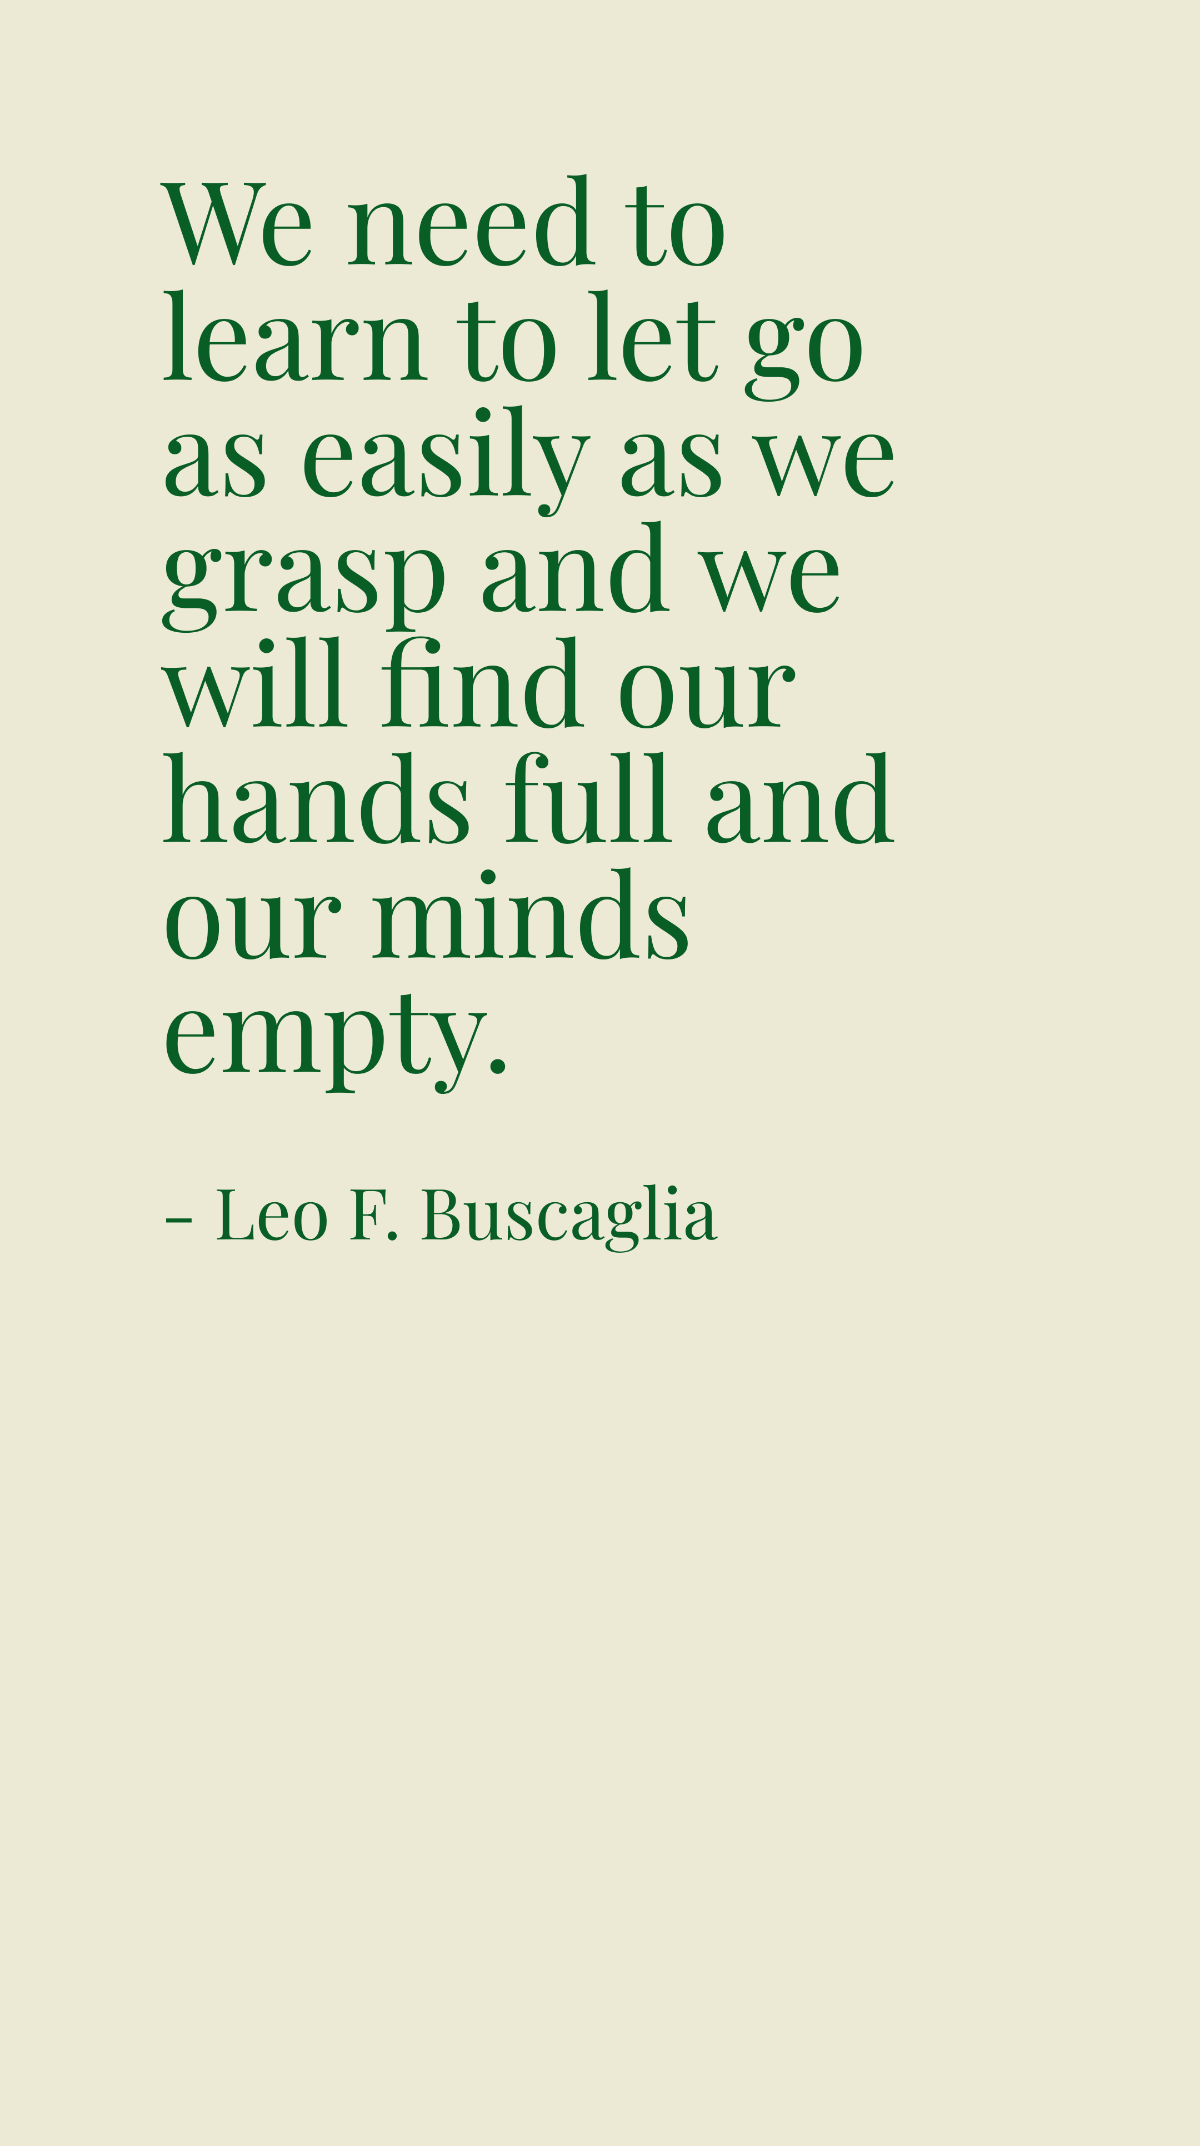 Free Leo F. Buscaglia - We need to learn to let go as easily as we grasp and we will find our hands full and our minds empty. Template